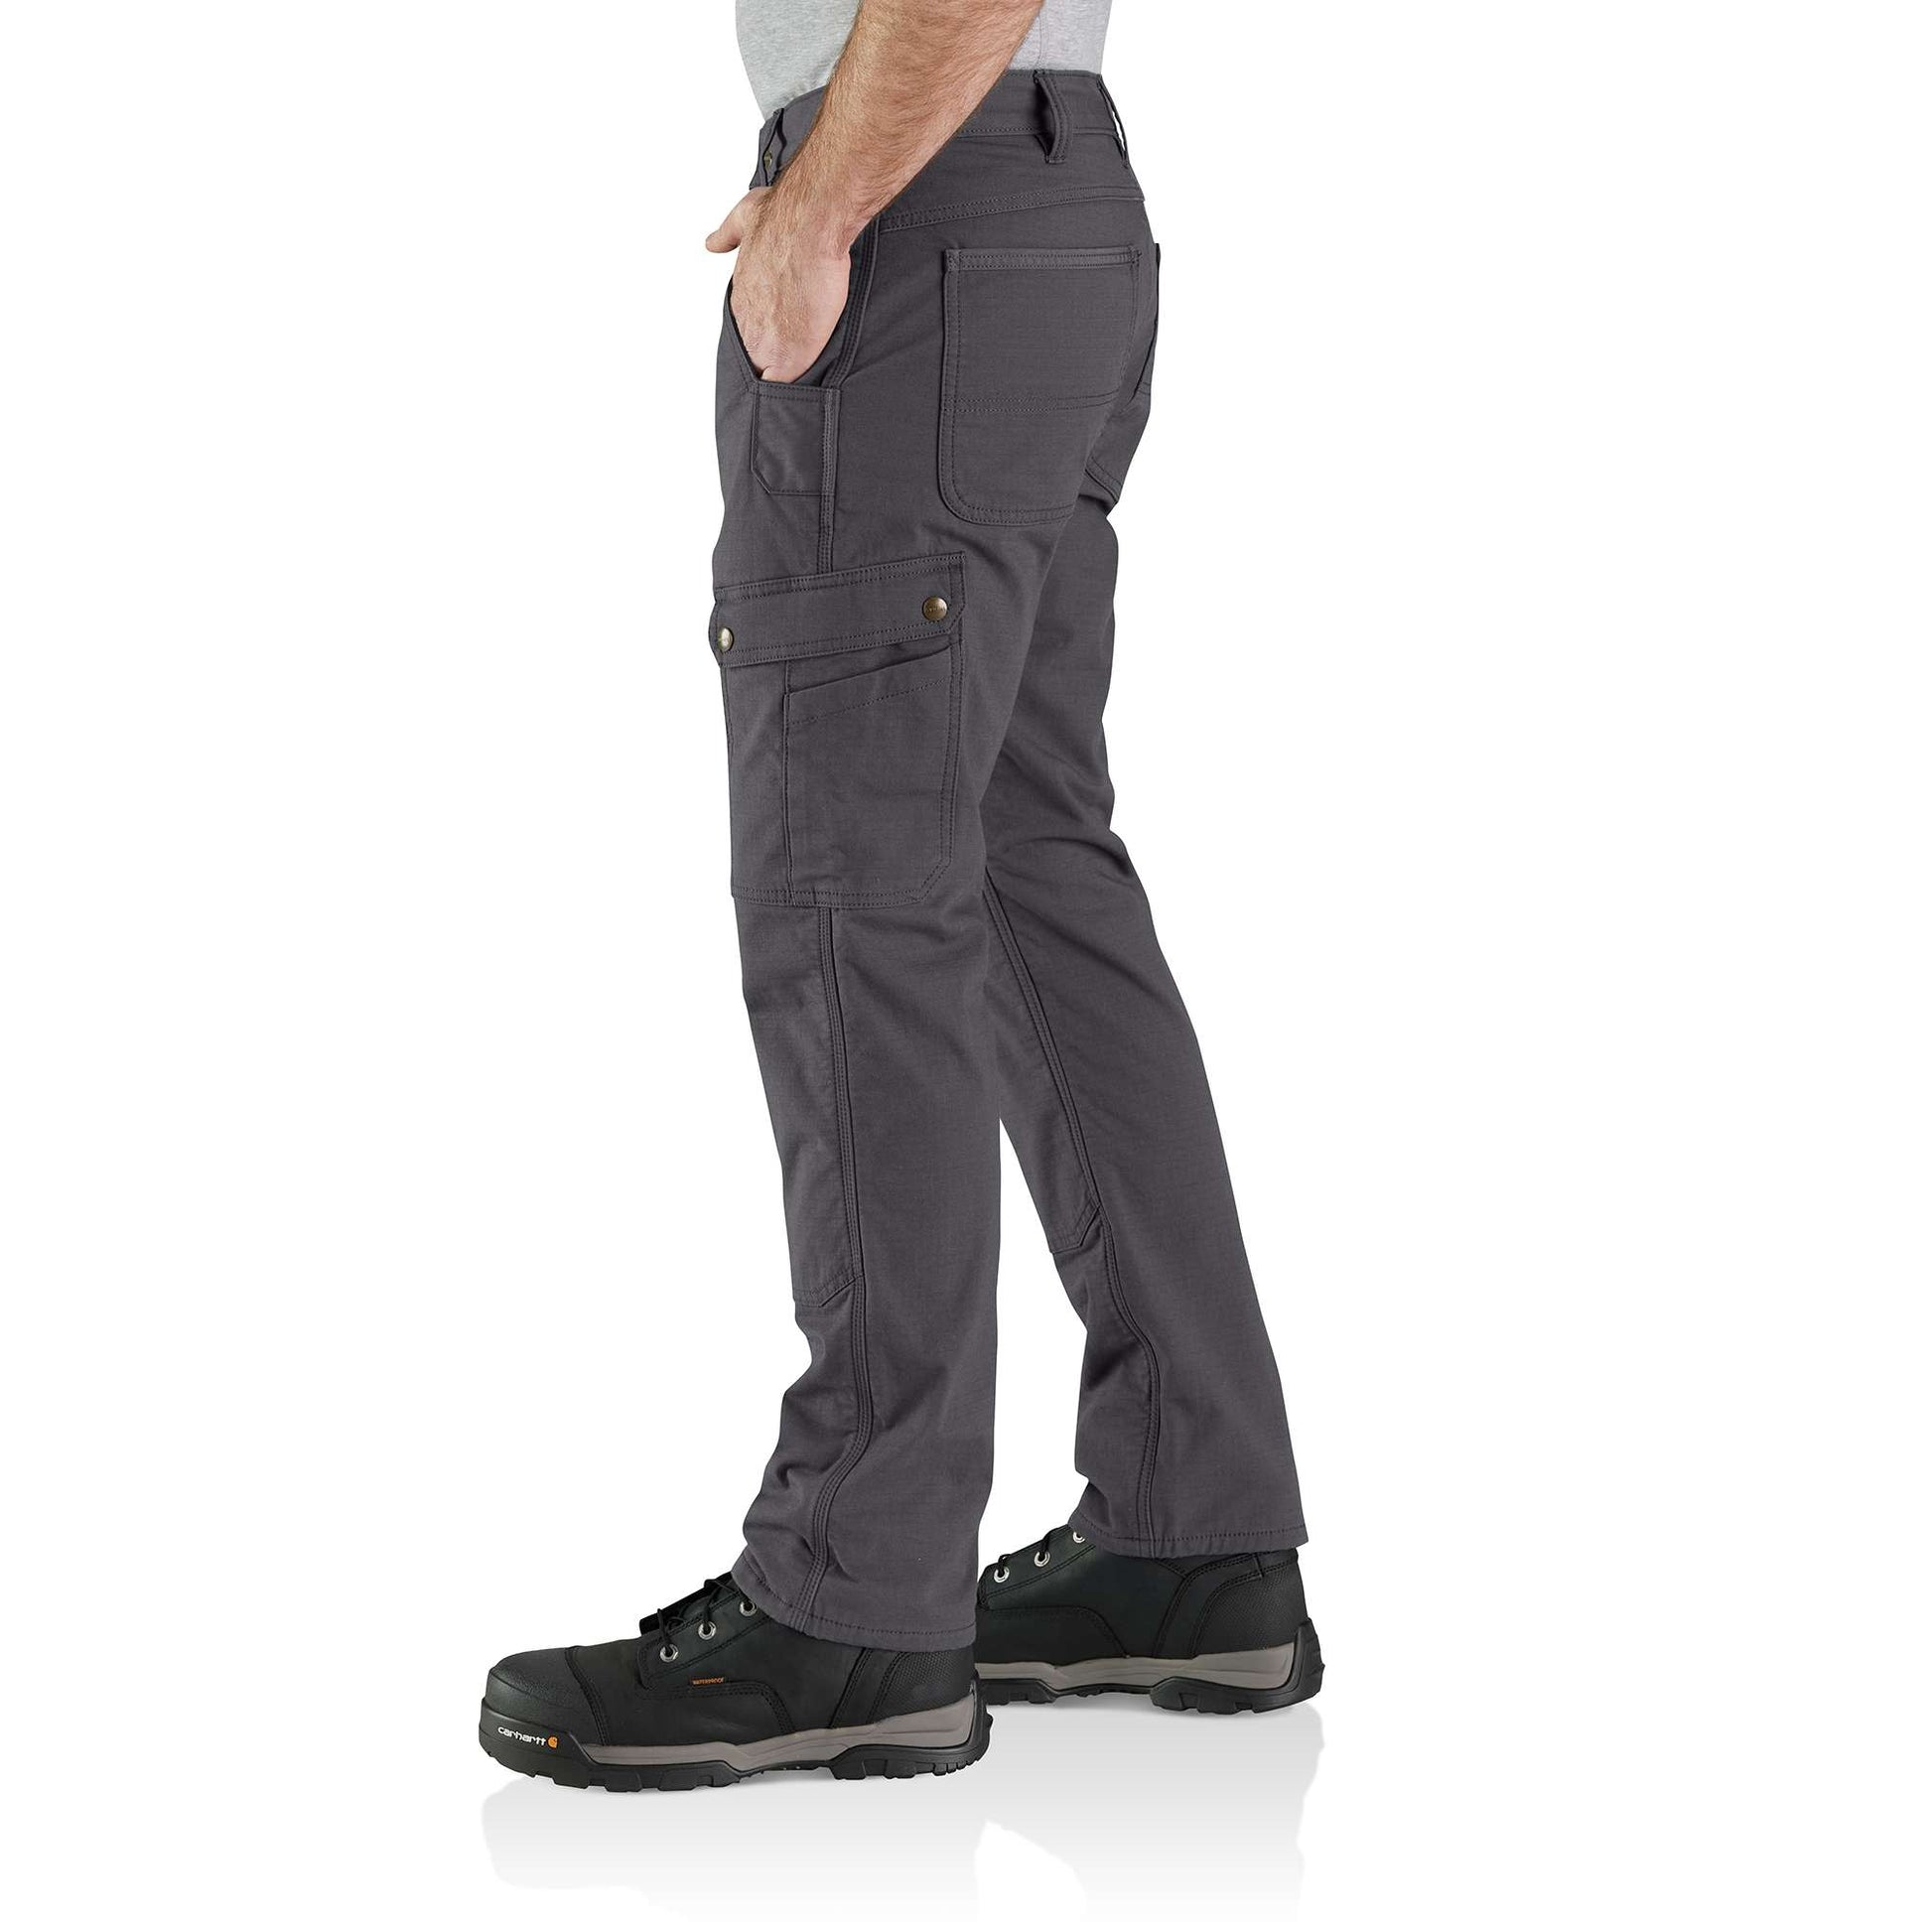 Carhartt Work Pants with Openings for Knee Pads 